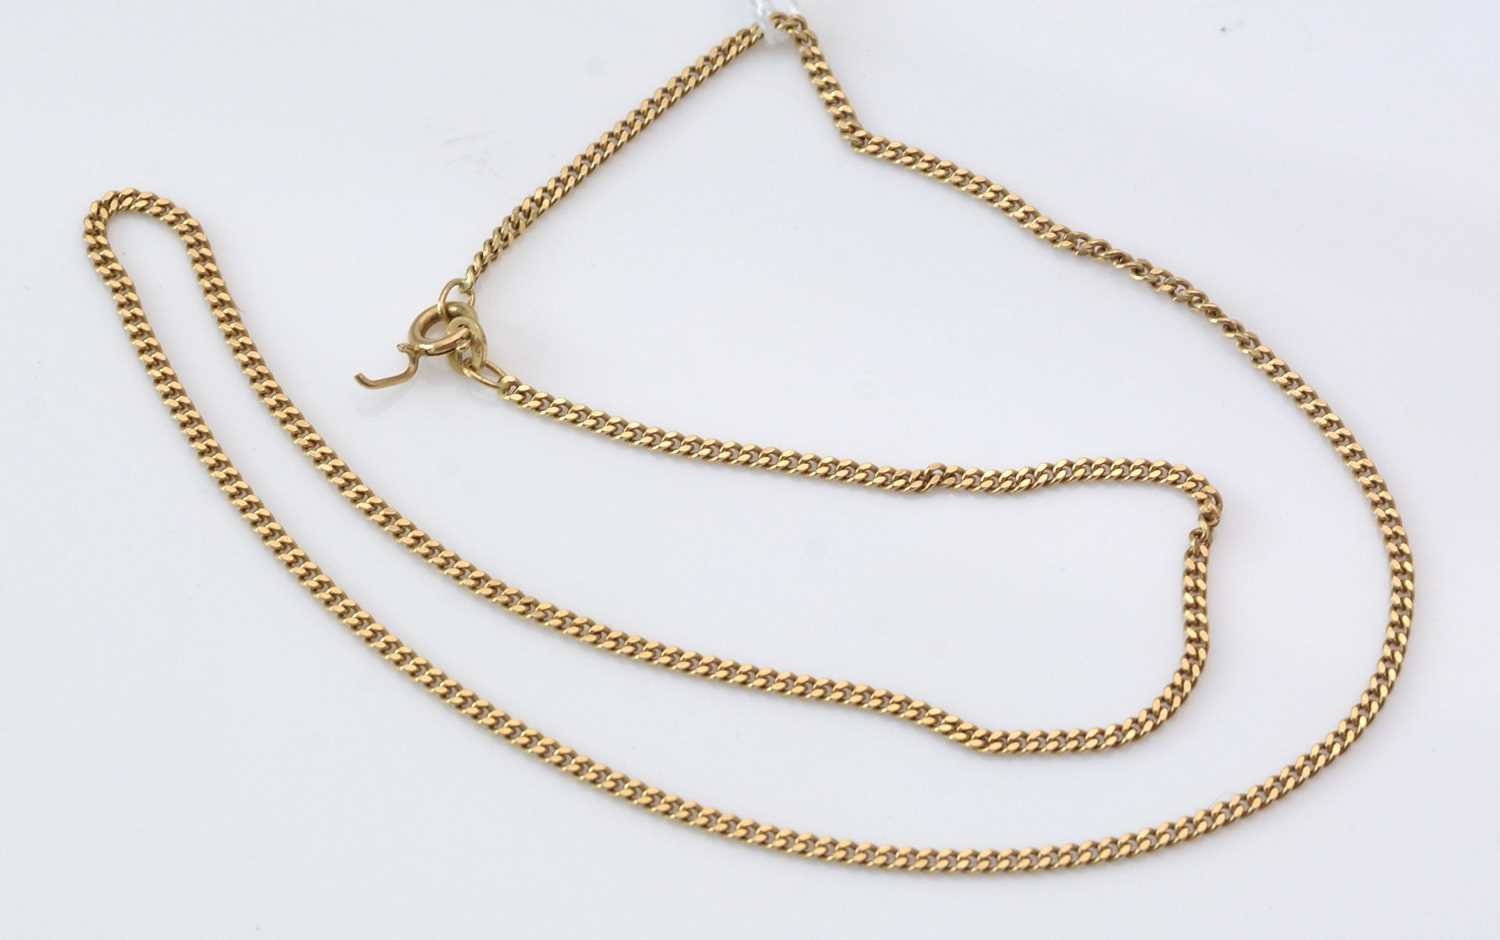 Lot 153 - 18ct. yellow gold chain necklace.